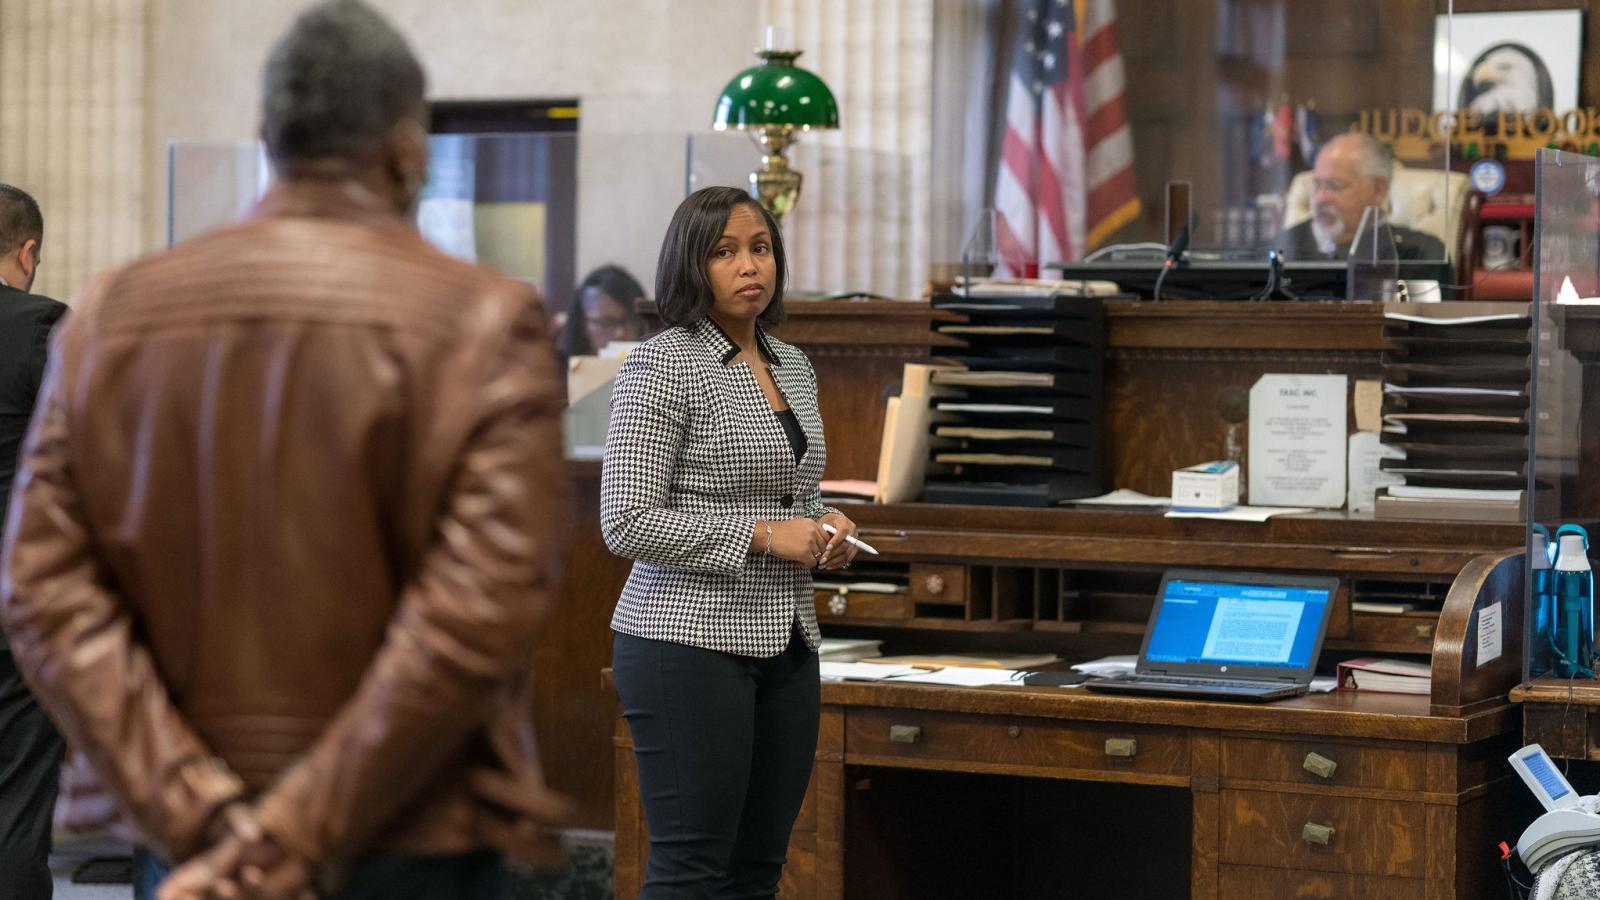 Assistant Public Defender consults with her client in a courtroom